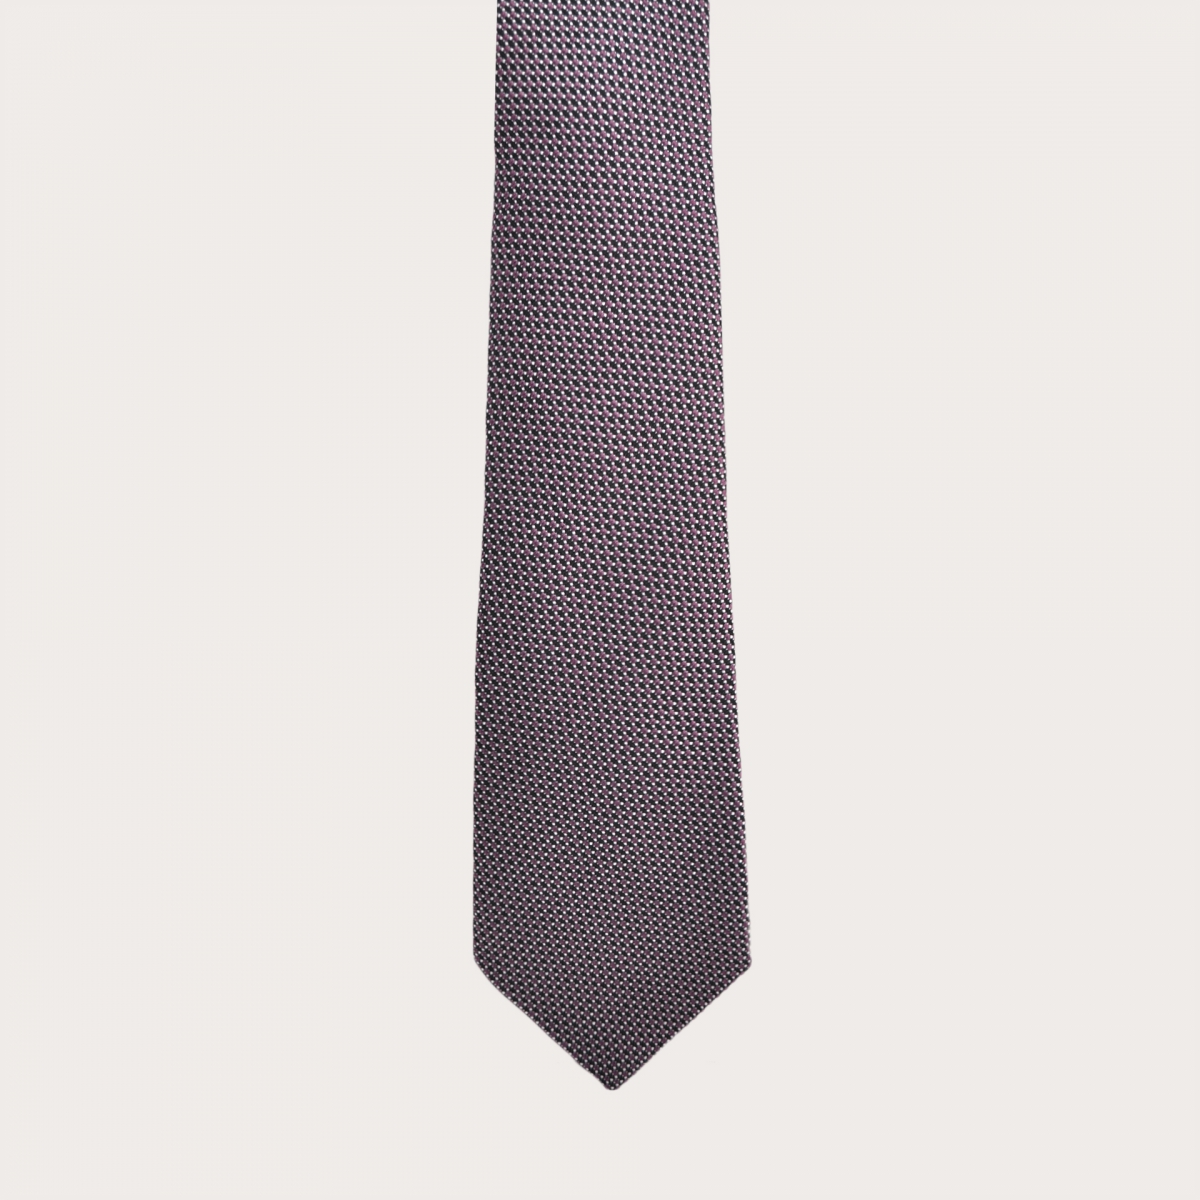 Jacquard silk tie, pink dotted